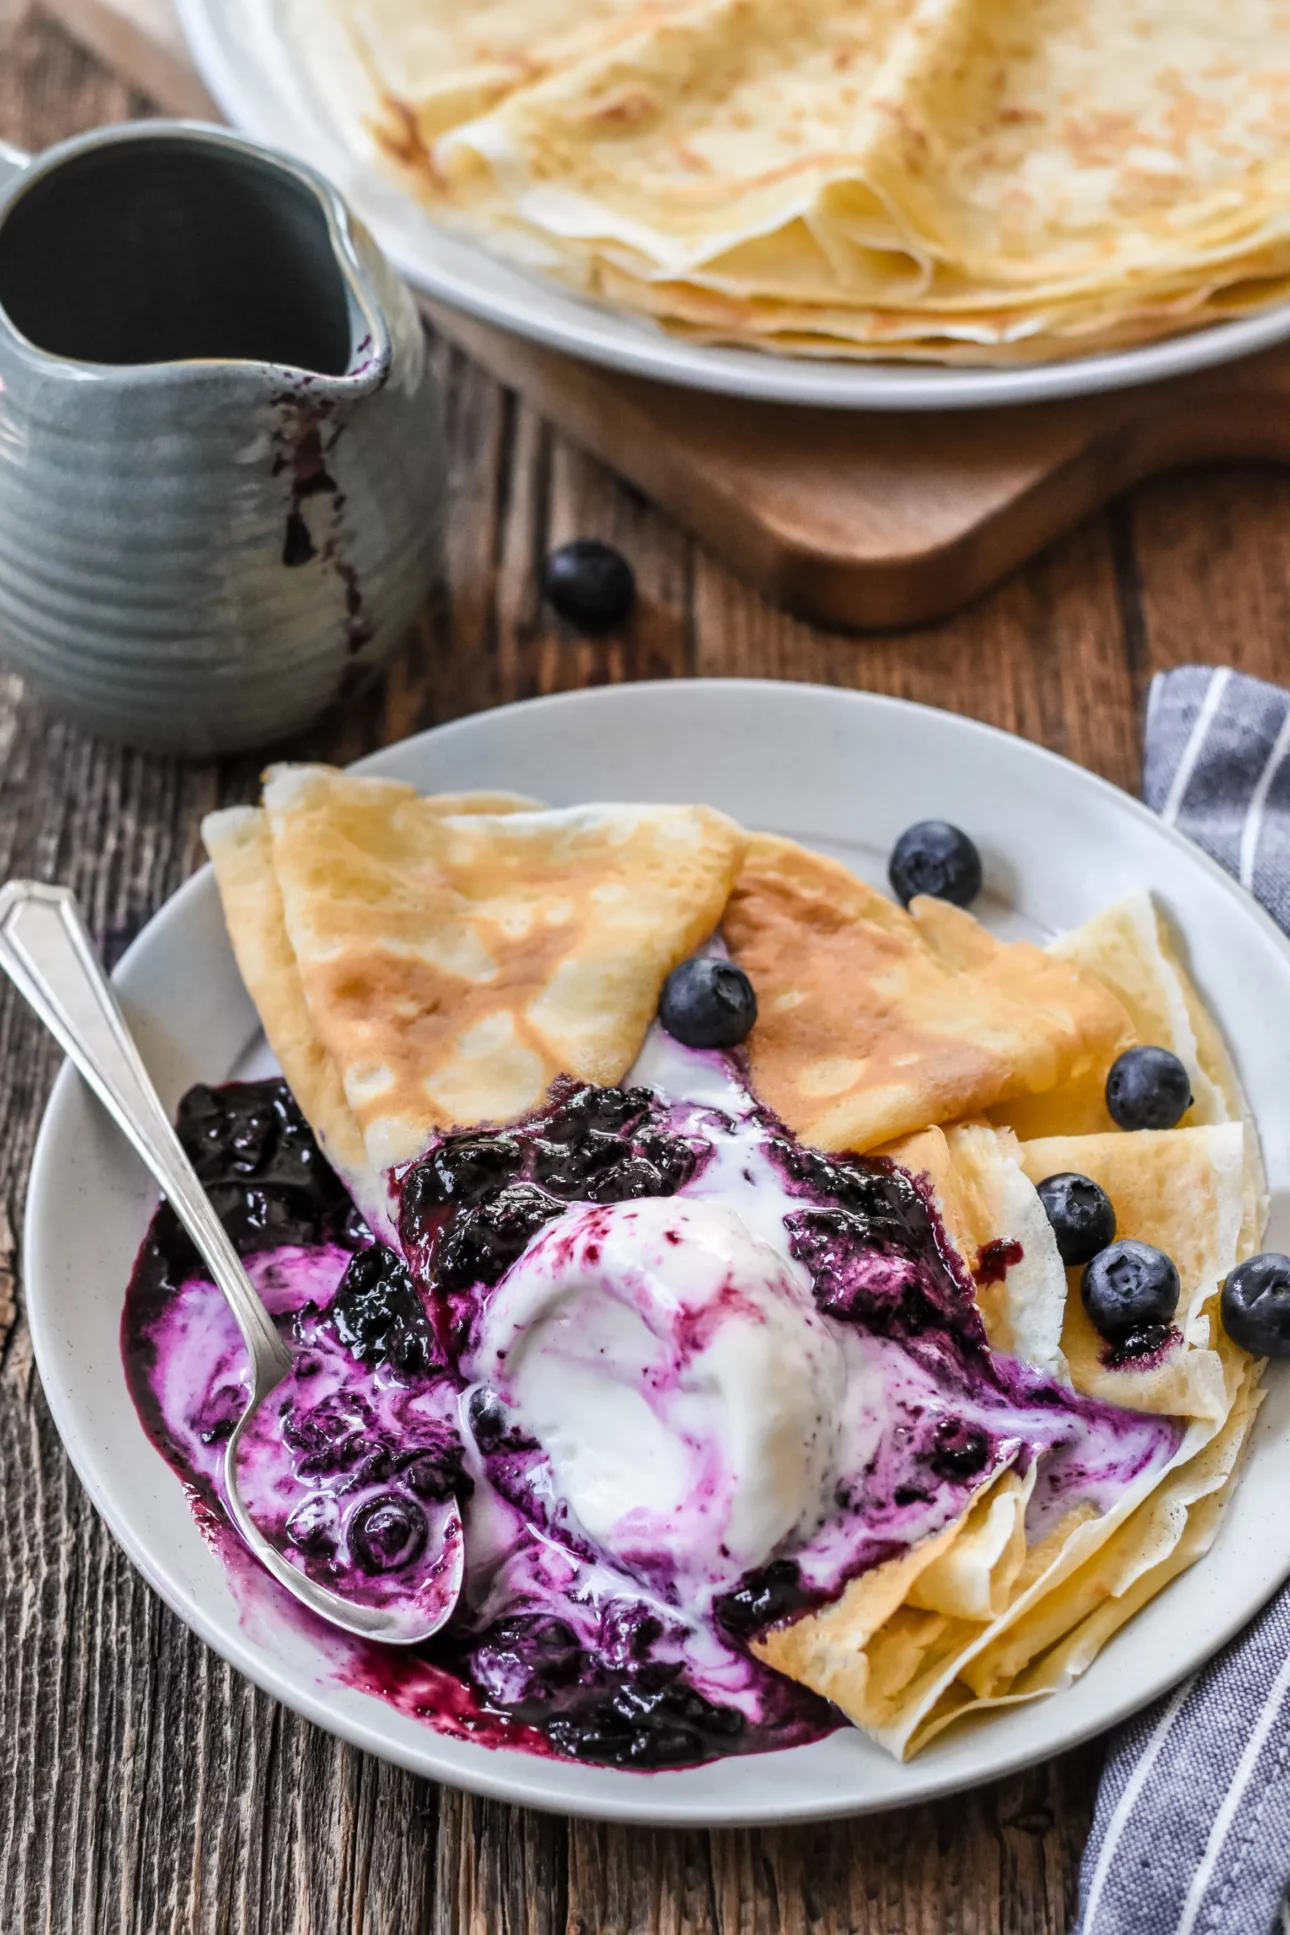 Crêpes with Blueberry Balsamic Sauce and Vanilla Ice Cream by Pardon Your French // FoodNouveau.com